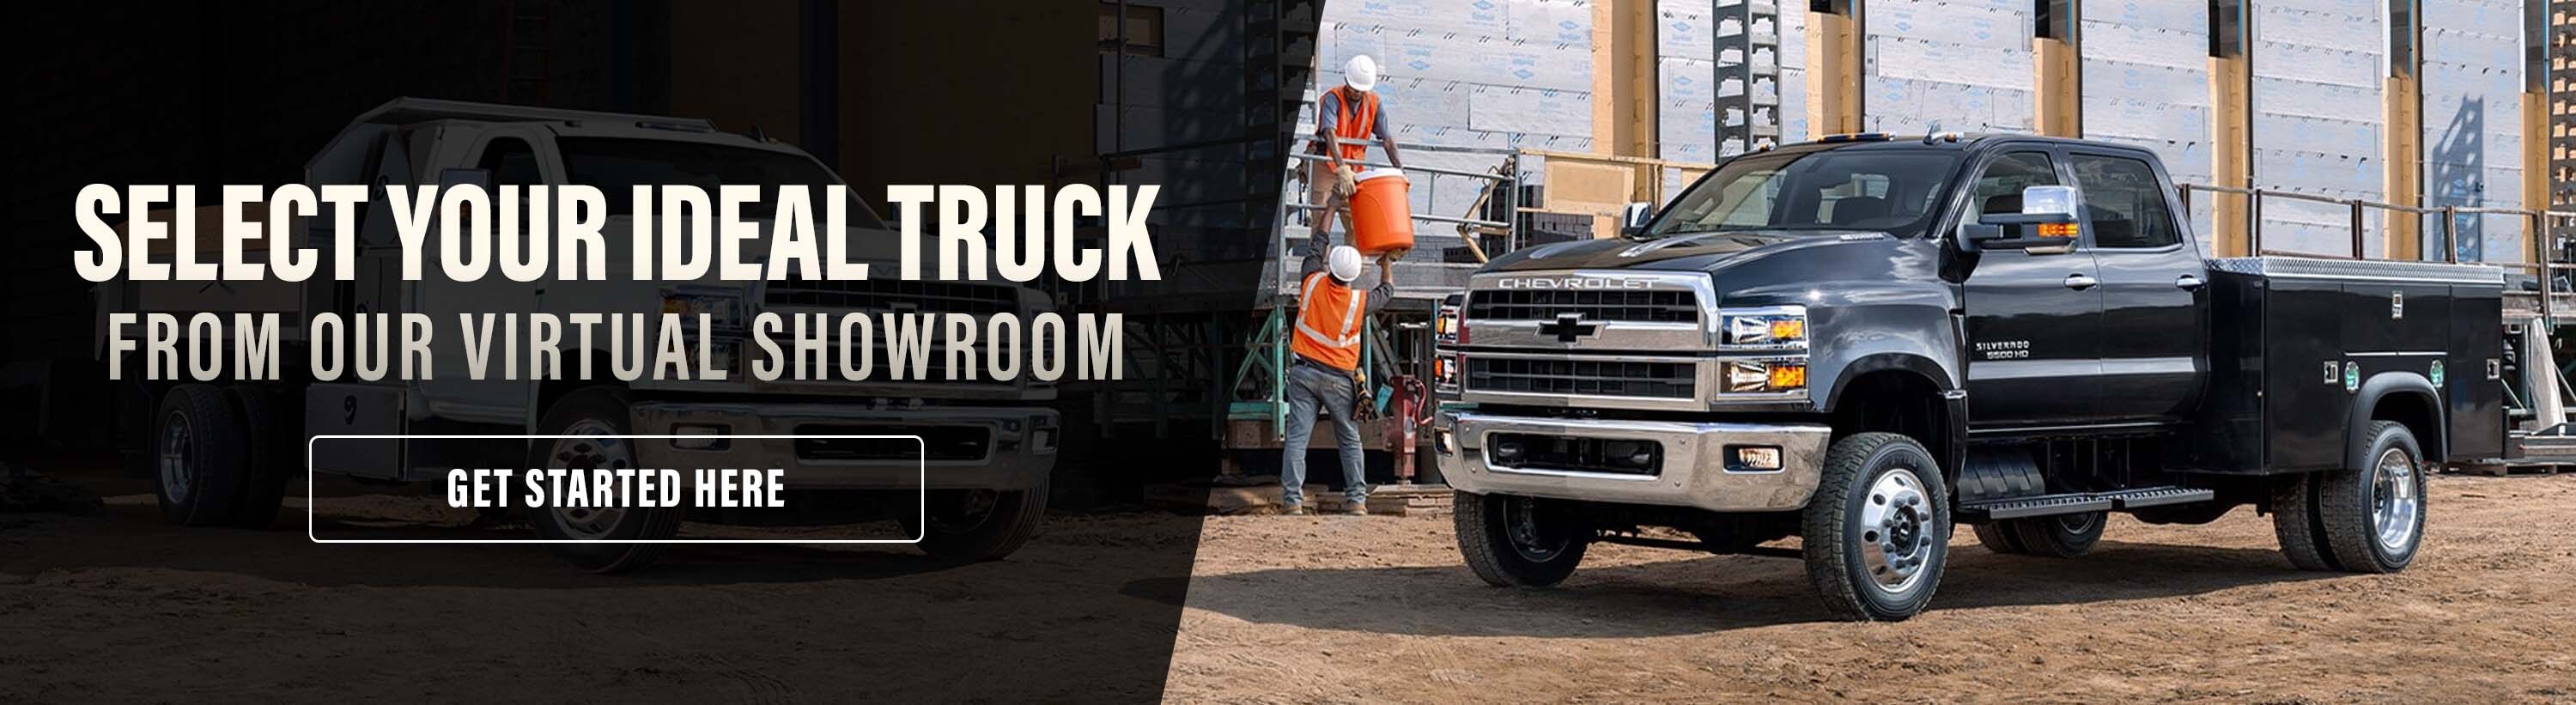 Select Your Ideal Truck from our Virtual Showroom. Get Started Here